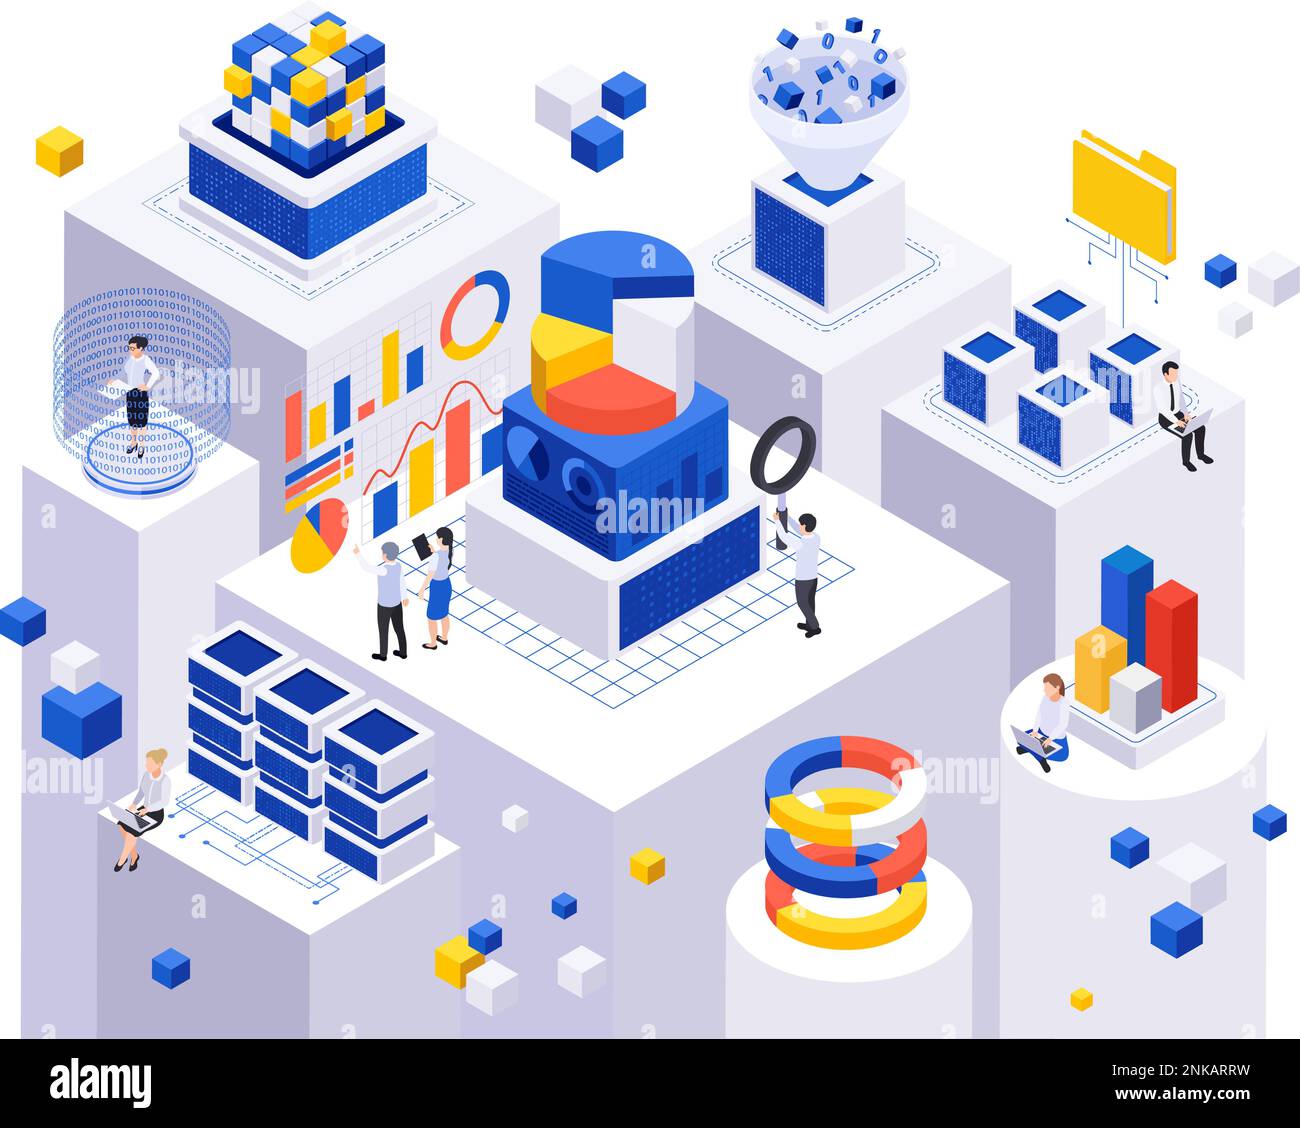 Data economy isometric composition with circular graphs bar charts flying cubes server storage and human characters vector illustration Stock Vector